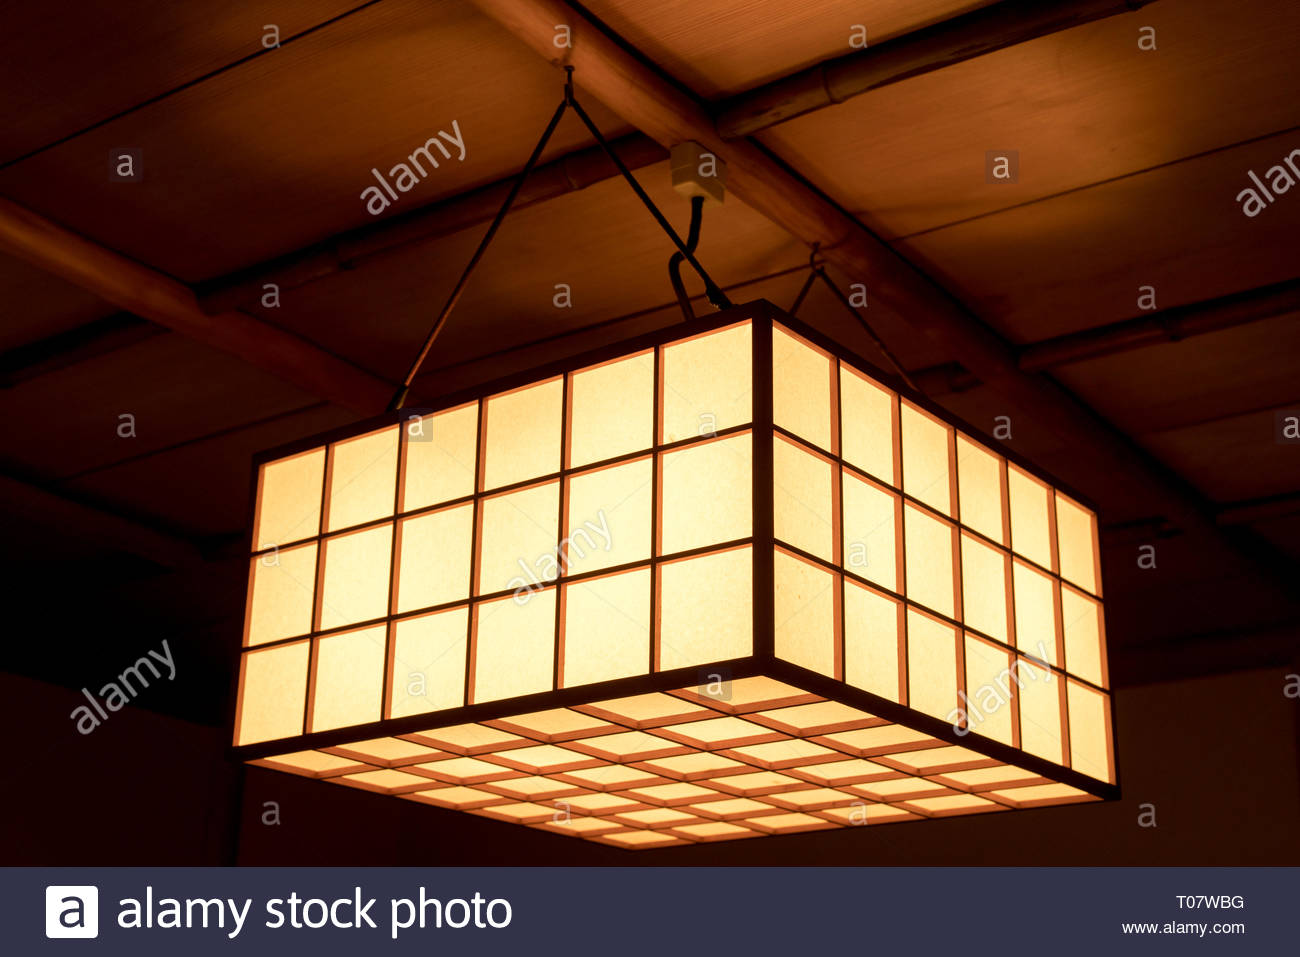 Light Hanging From The Ceiling In An Old Traditional Japanese